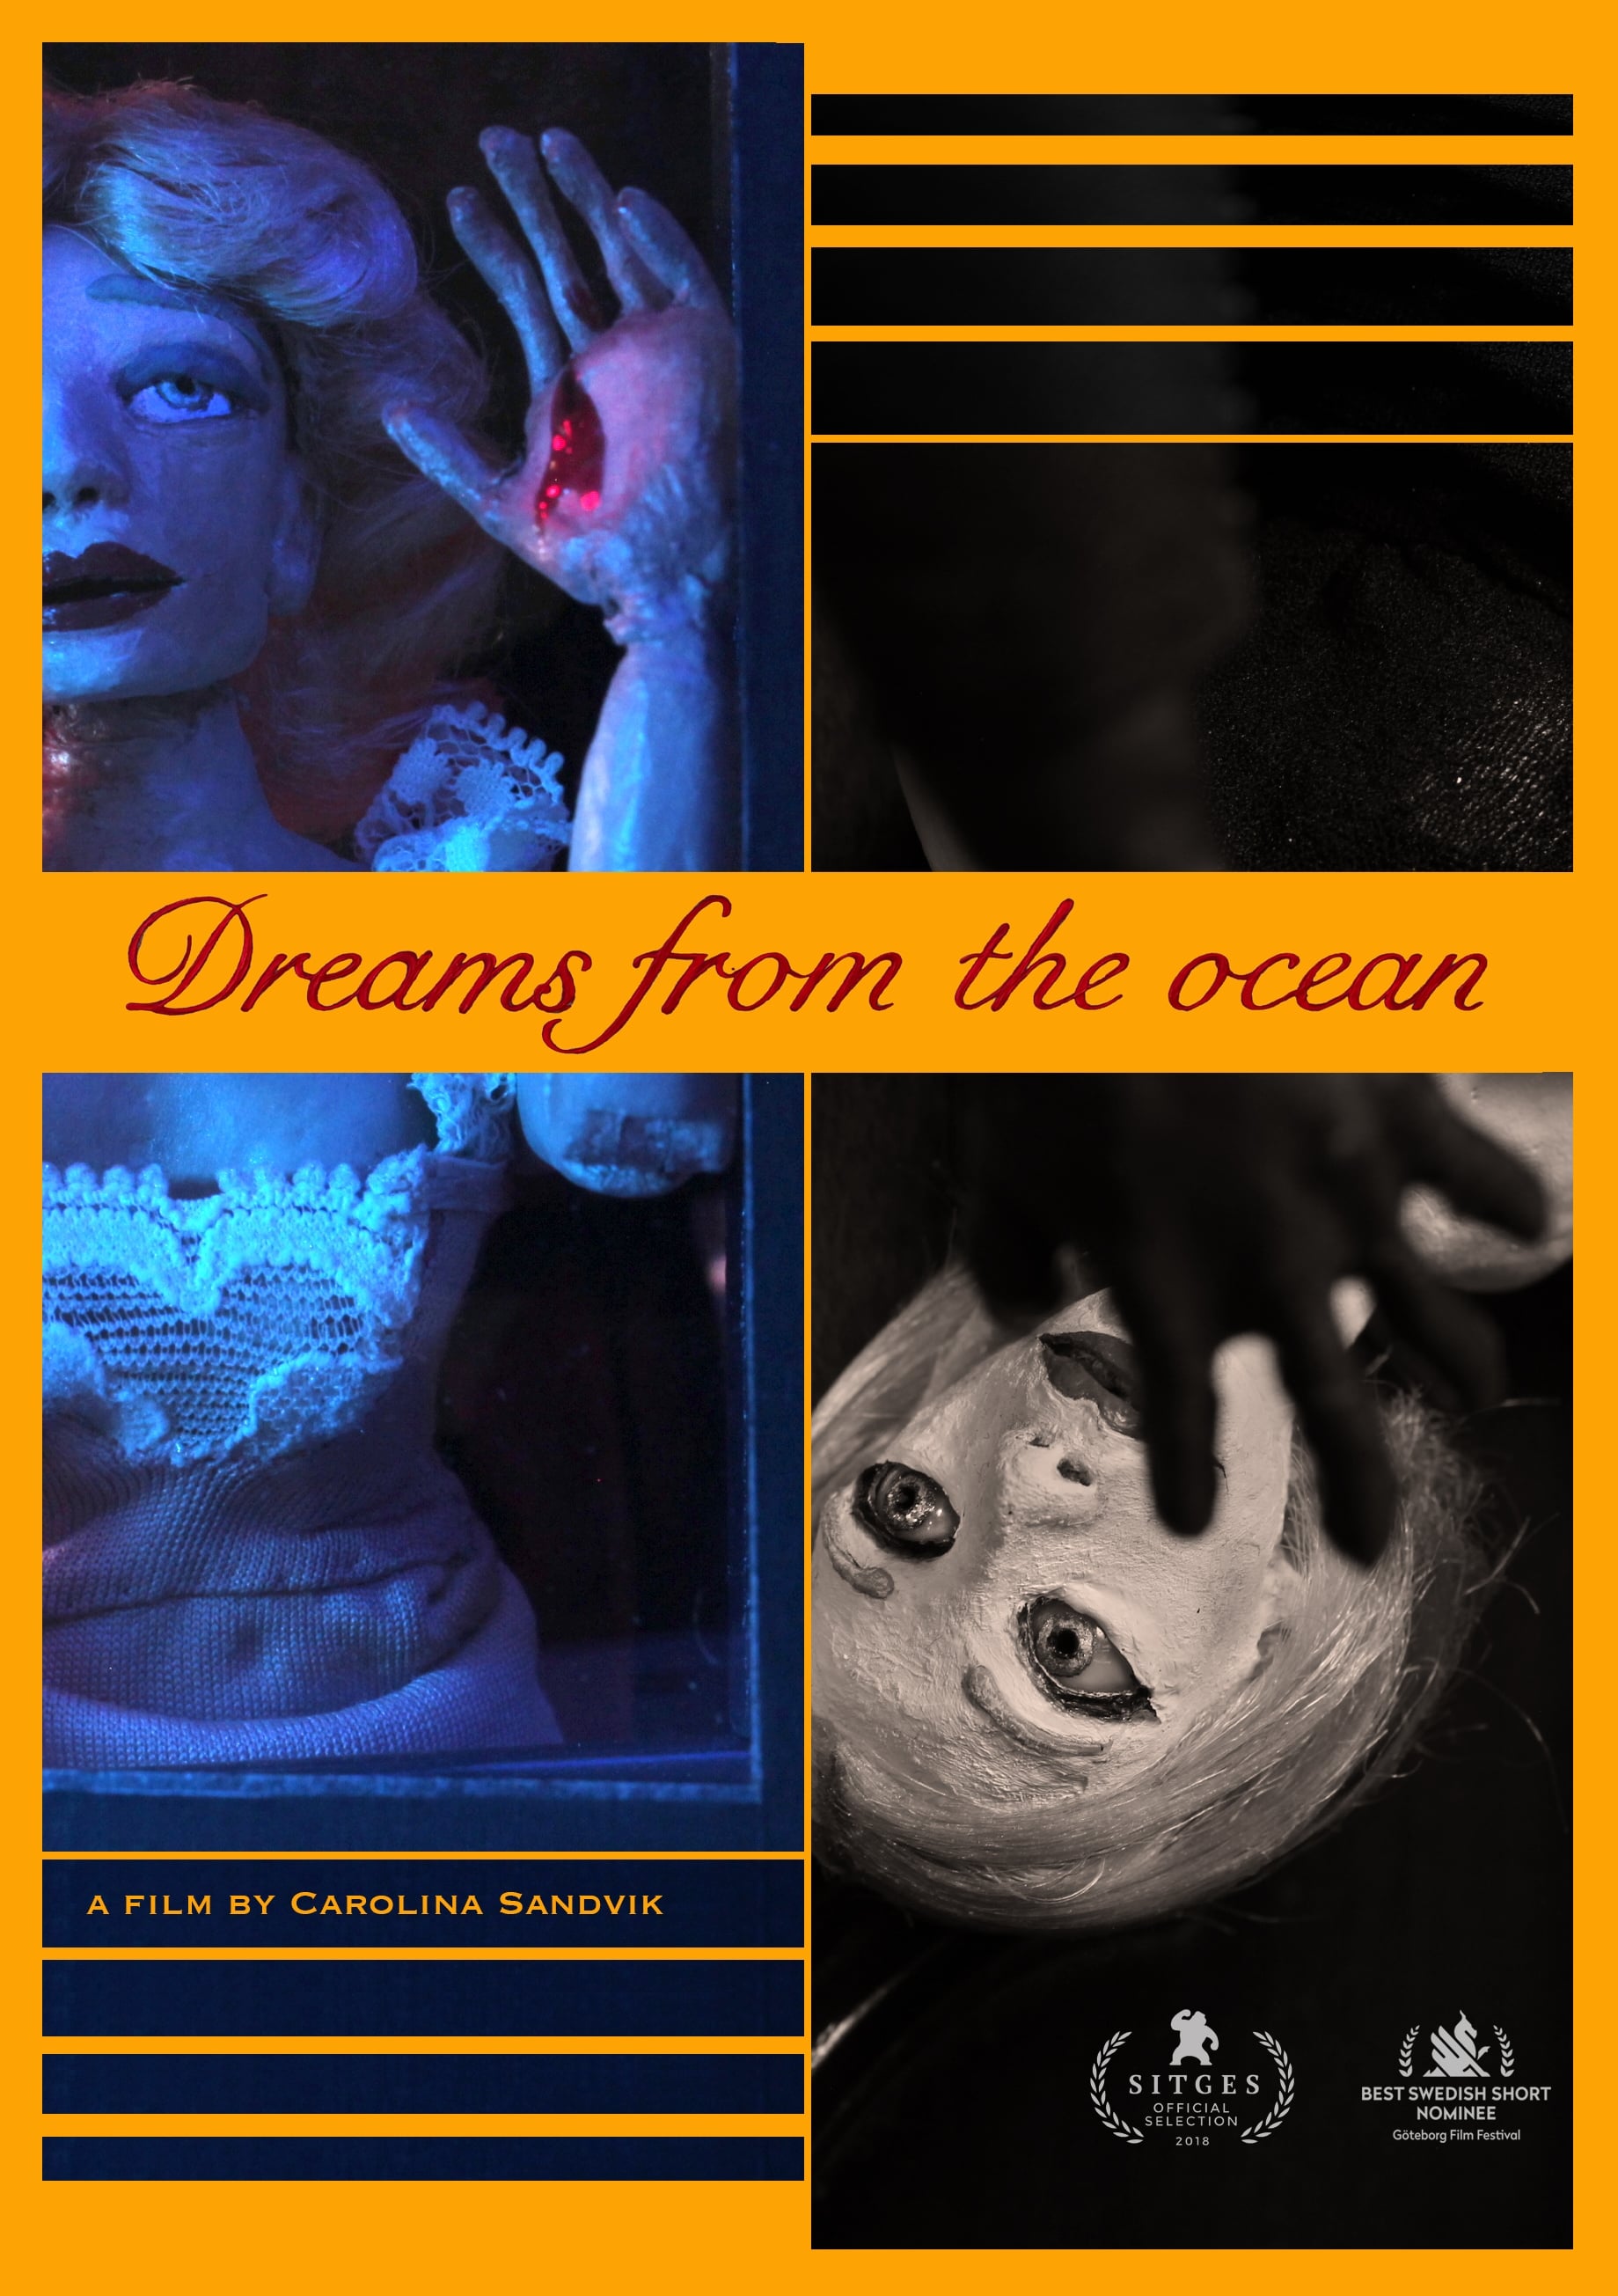 Dreams from the ocean